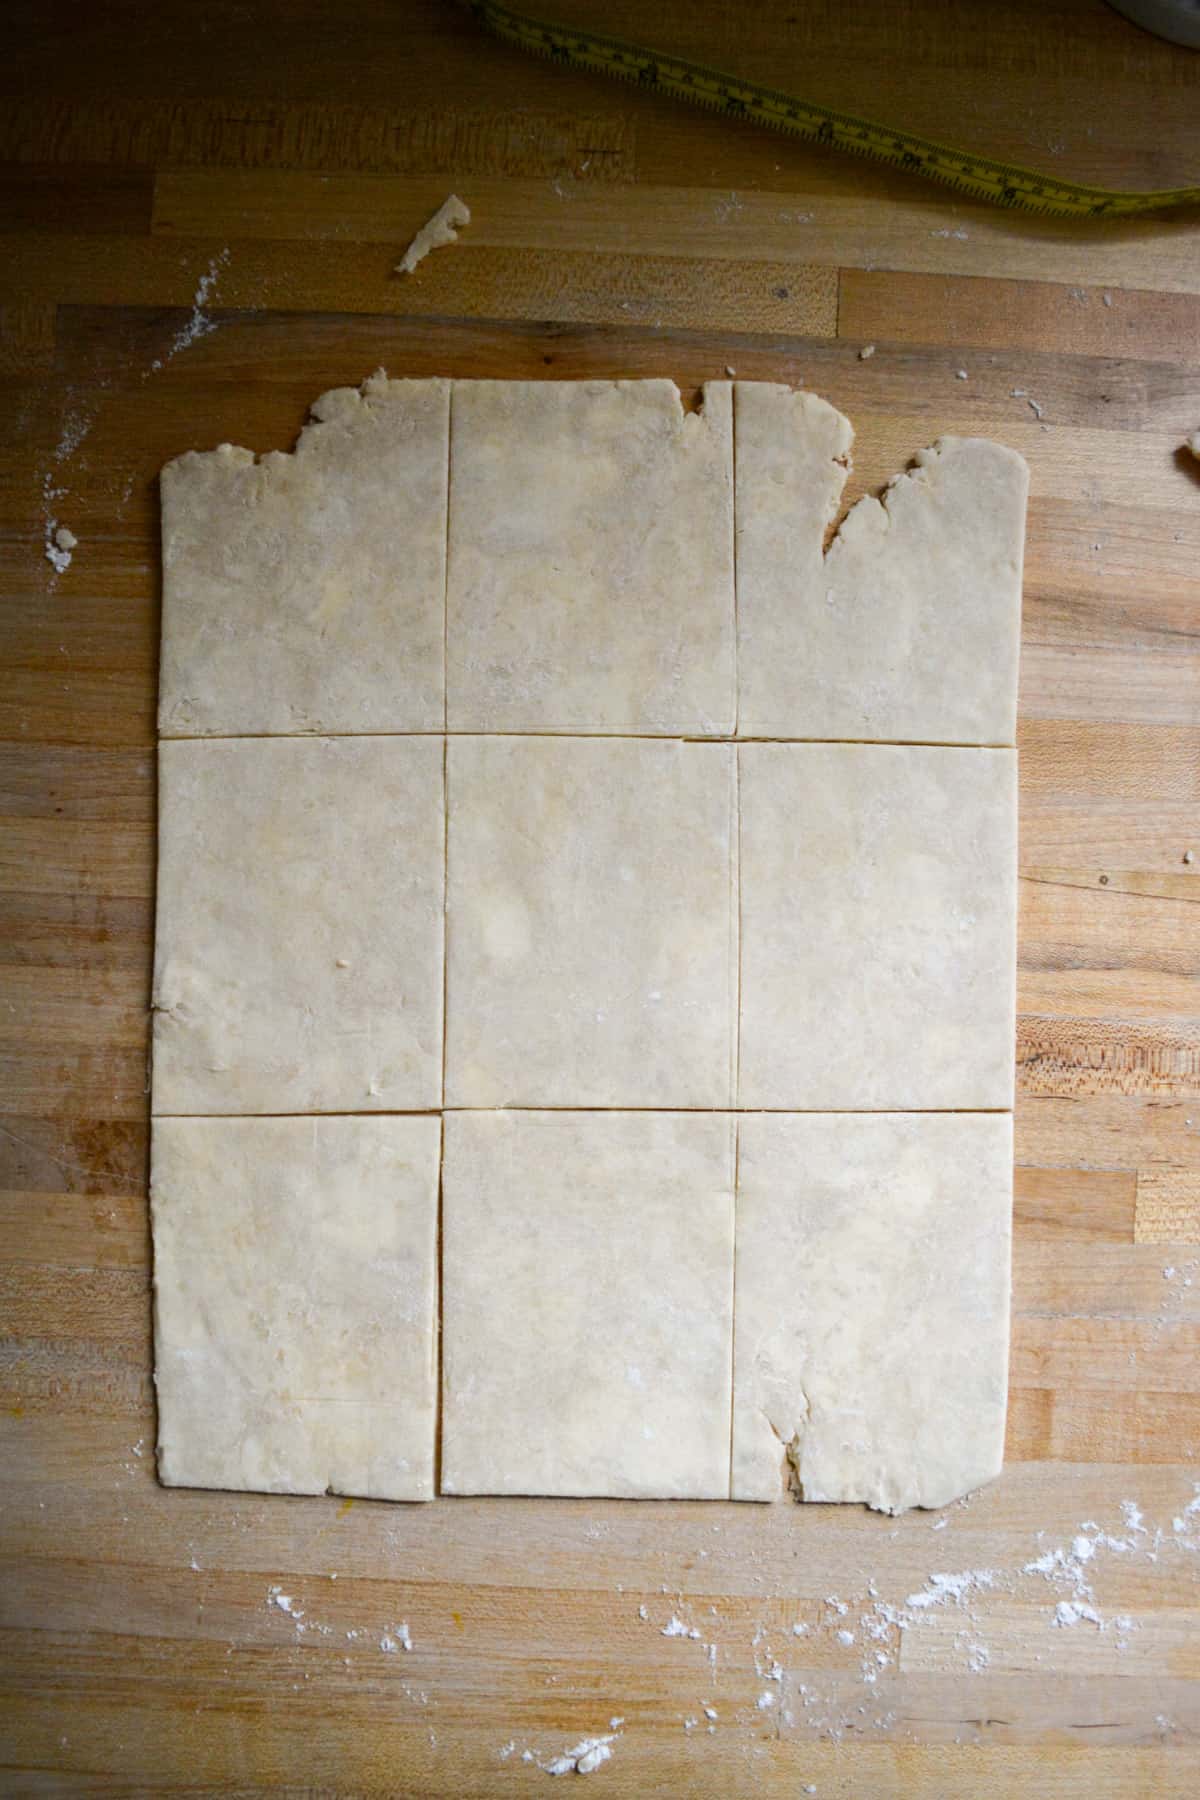 Pie dough rolled out and cut into rectangles.